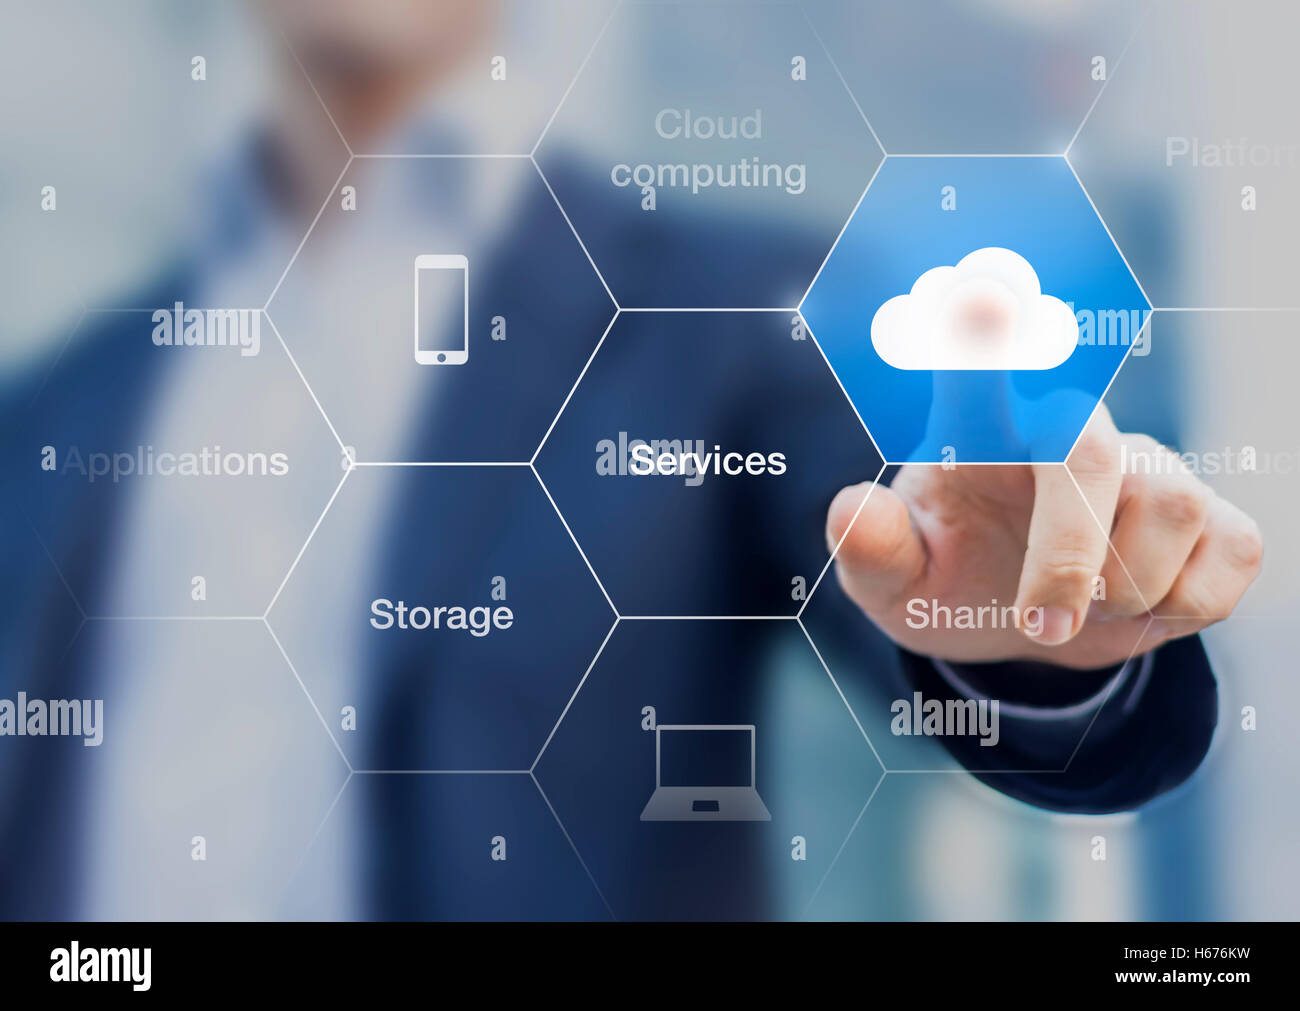 Concept about cloud computing, applications, storage, and services with a businessman touching a button on virtual screen Stock Photo